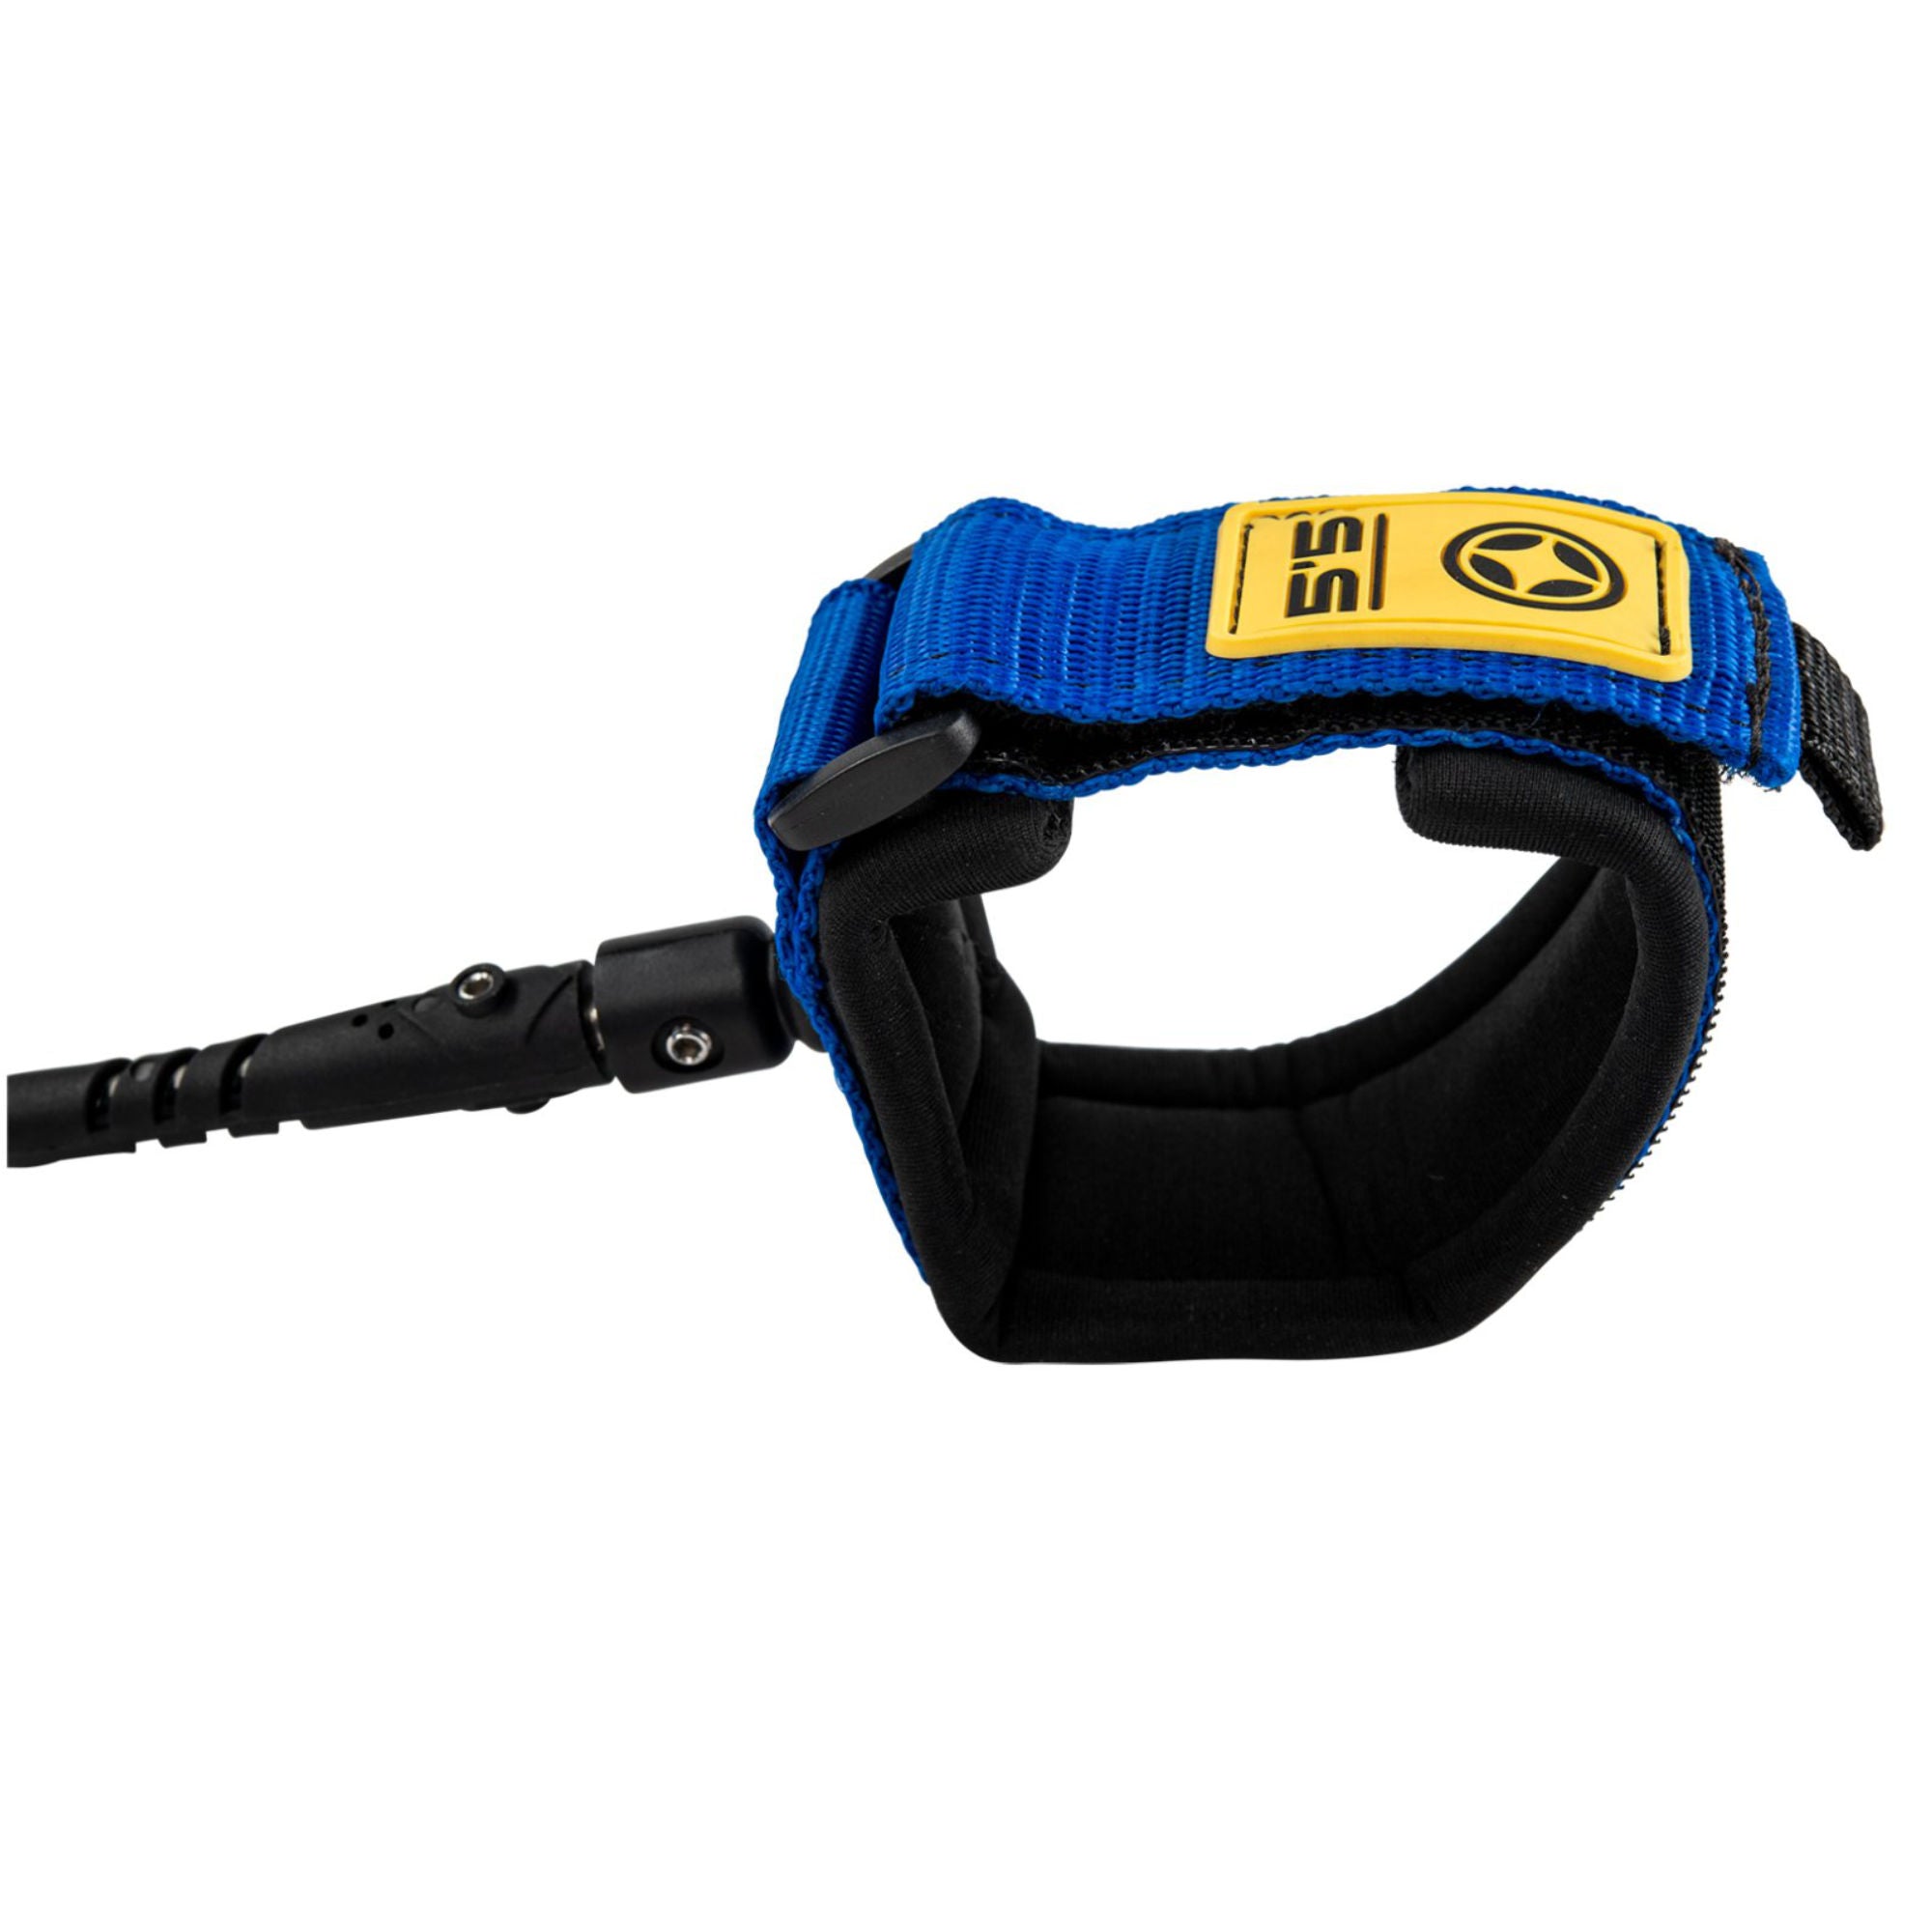 Wing Wrist Leash Coiled 167cm